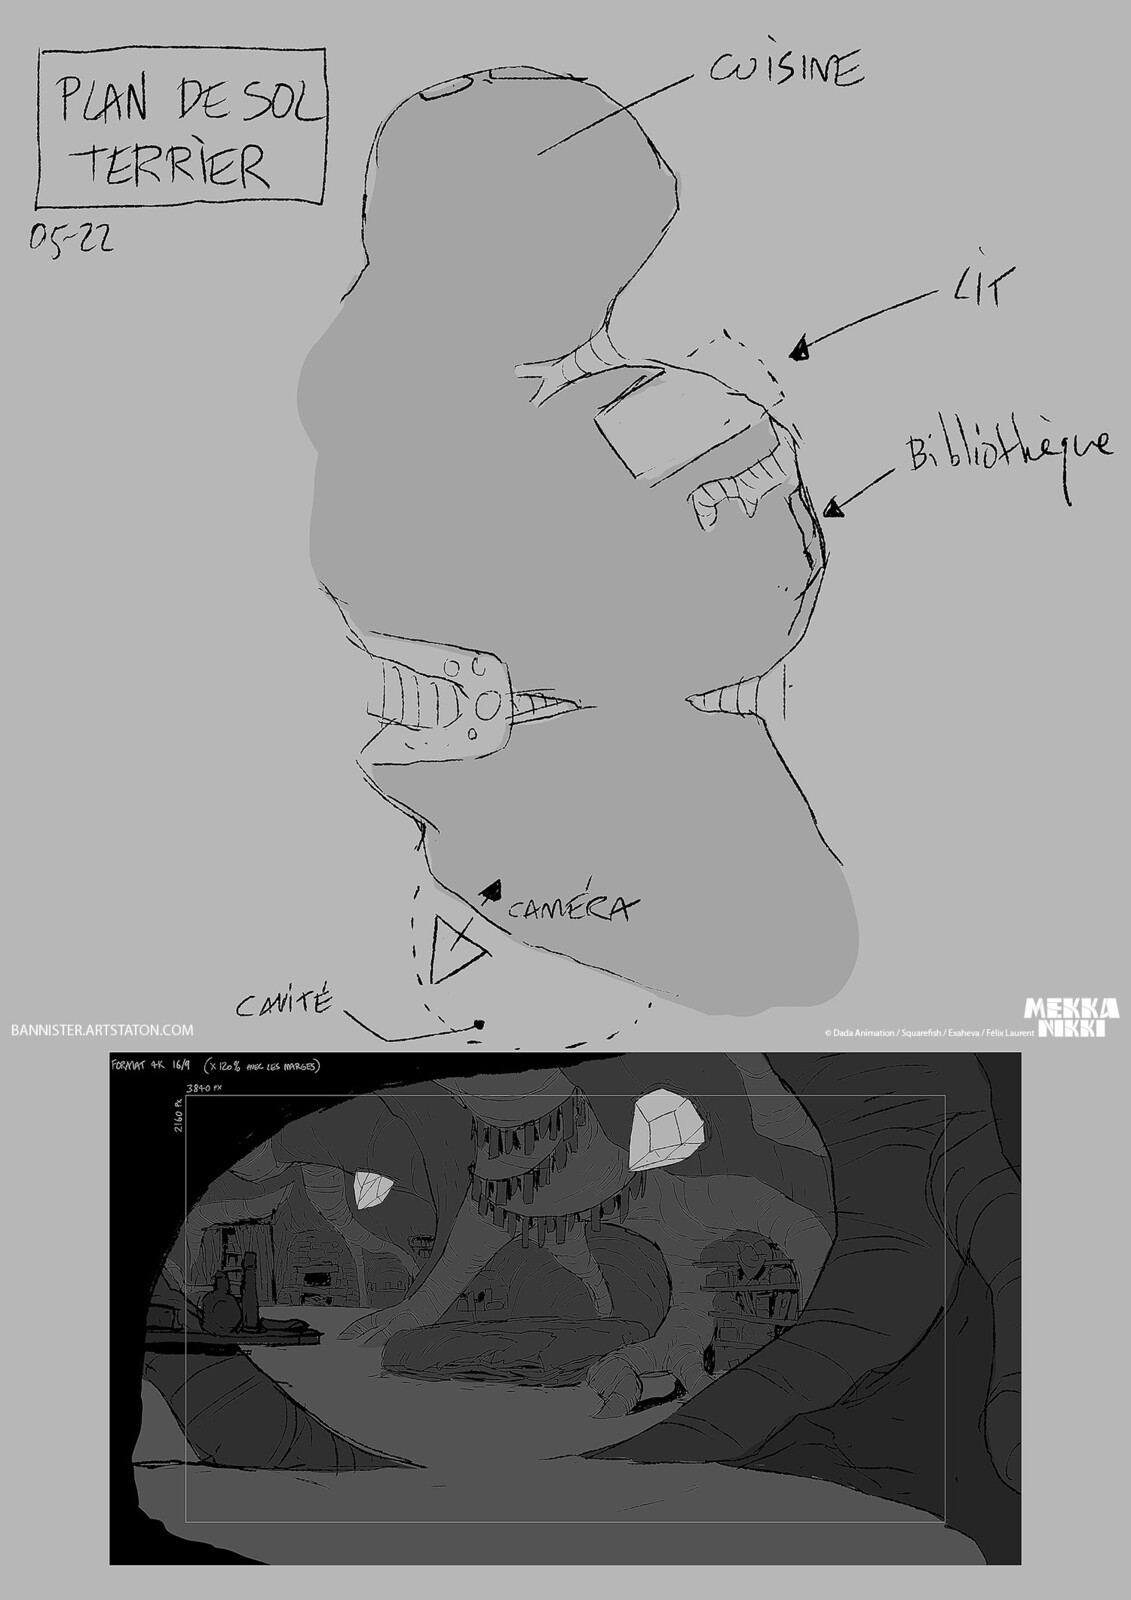 Underground lair concept design and floor map, before 3D modelling.